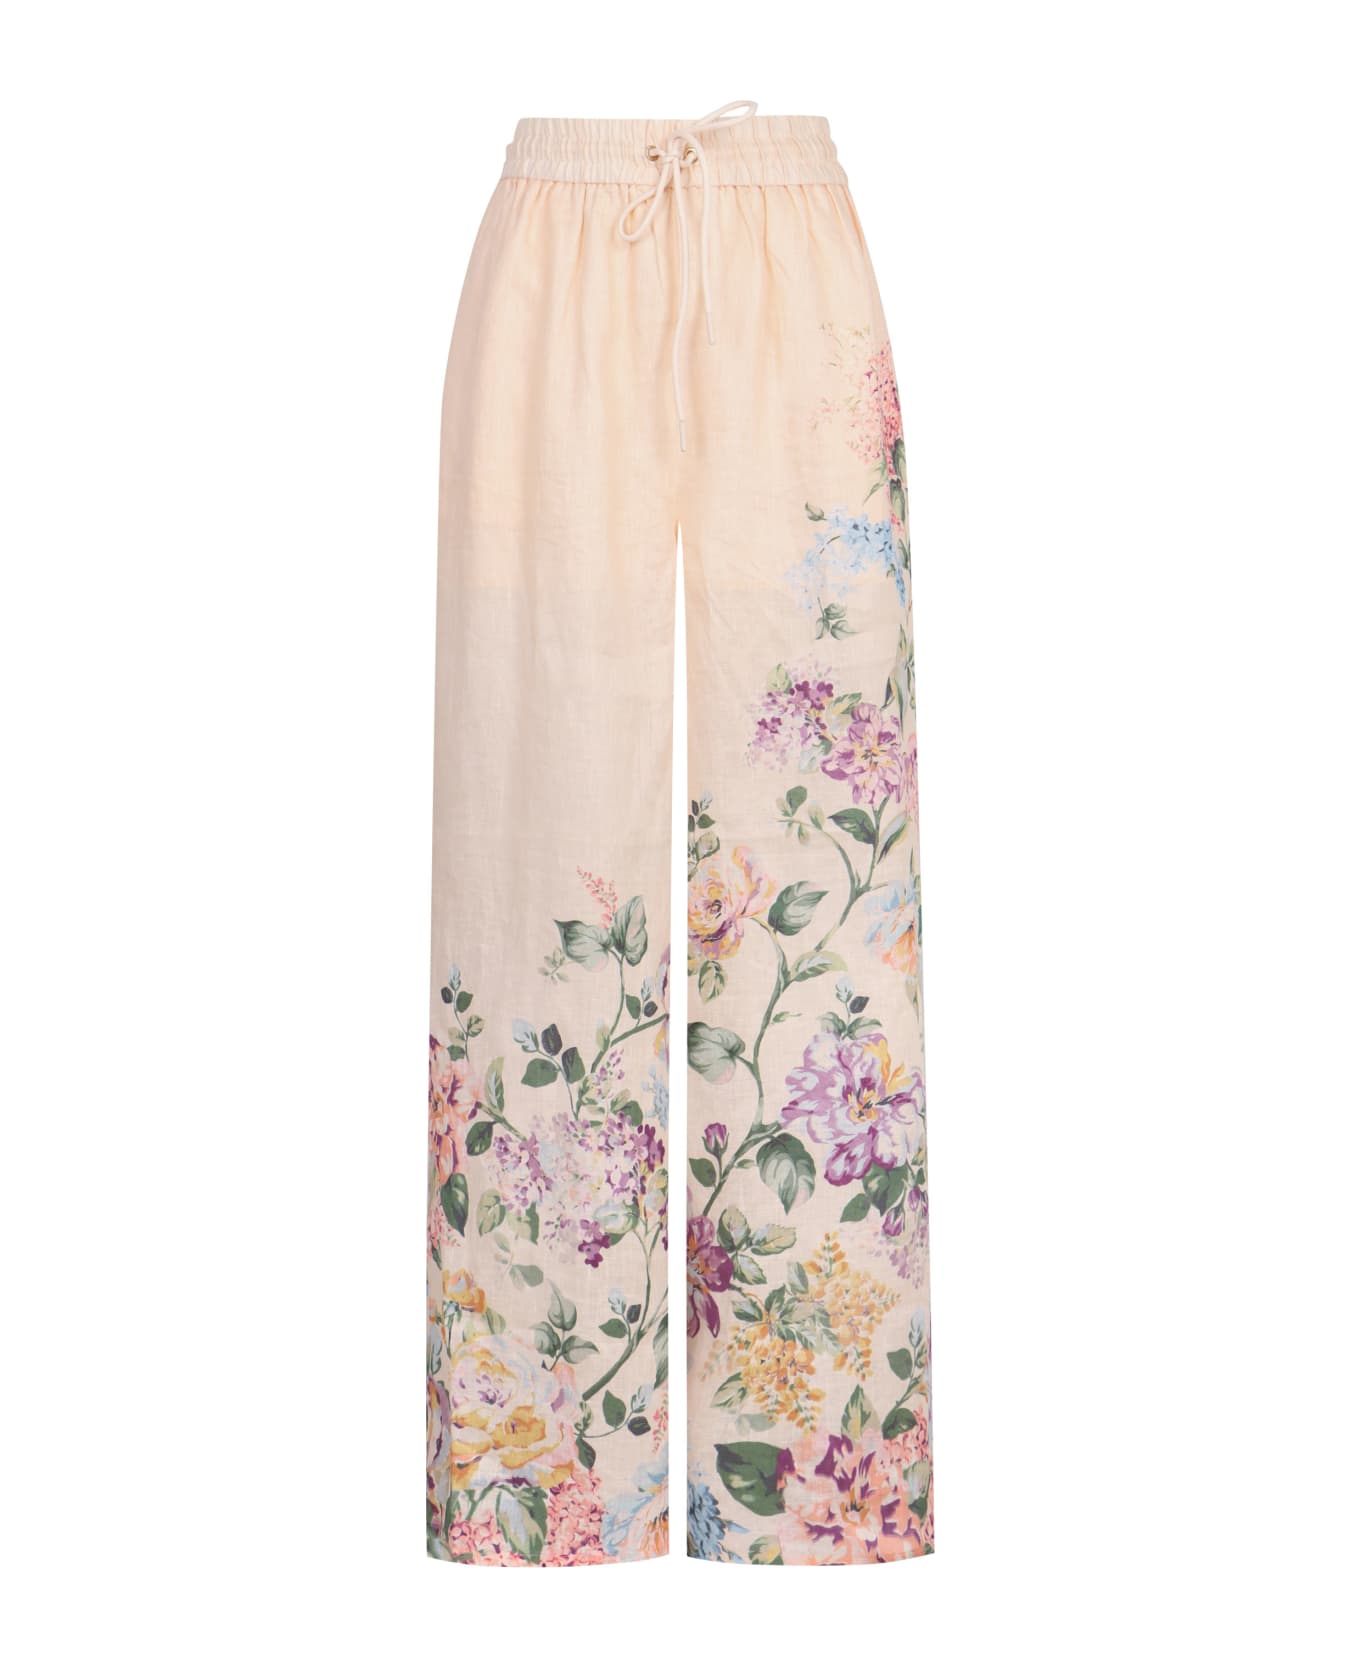 Zimmermann Halliday Wide Leg Trousers - Pink ボトムス